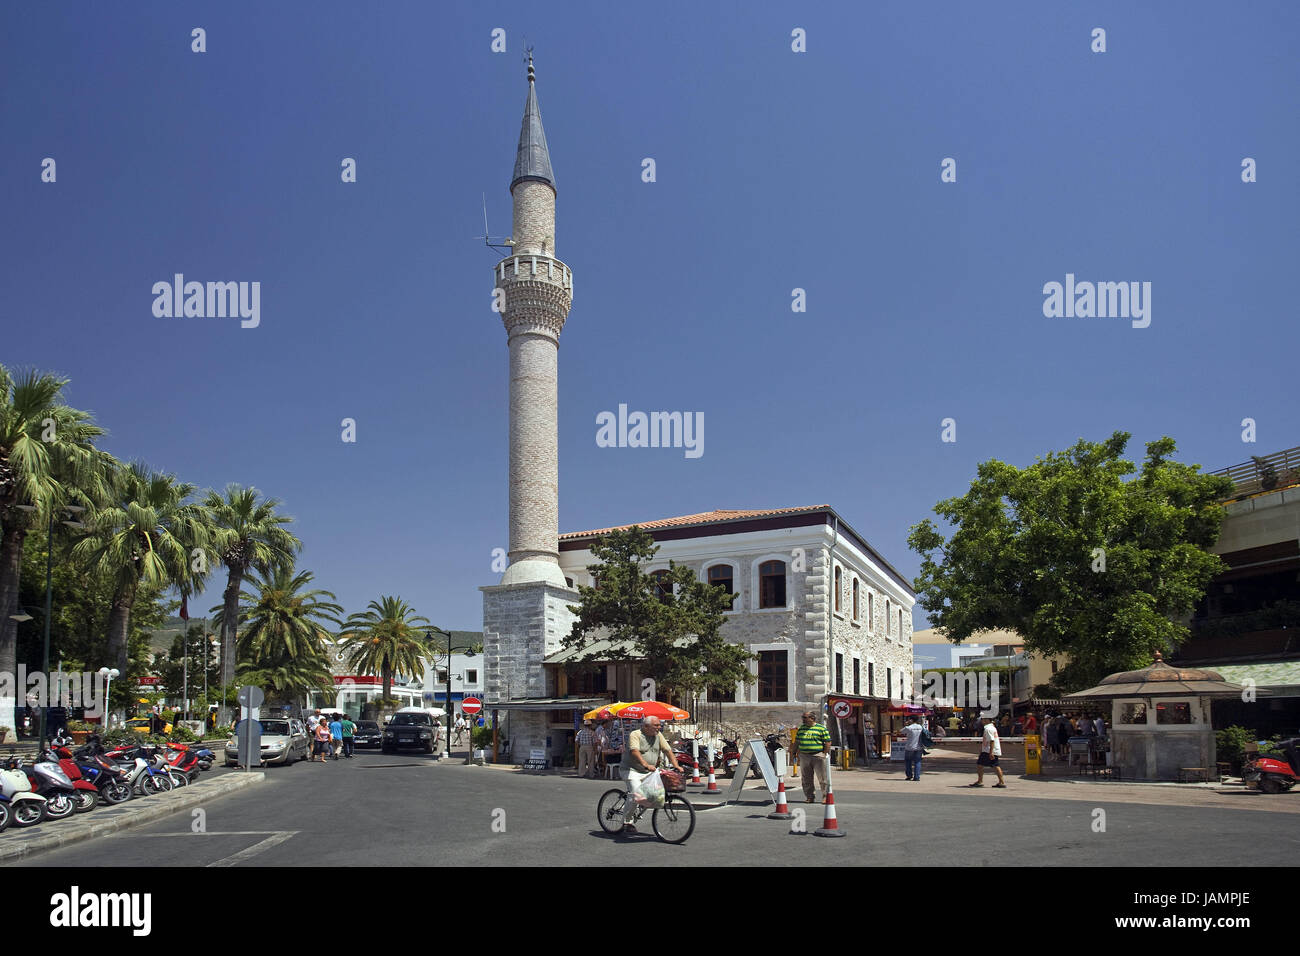 Turkey,Bodrum,Adiye mosque,minaret,street scene,passer-by,destination,town,place of interest,building,structure,architecture,faith,religion,Islam,church,sacred construction,trees,palms,people,pedestrians,outside,sunny, Stock Photo